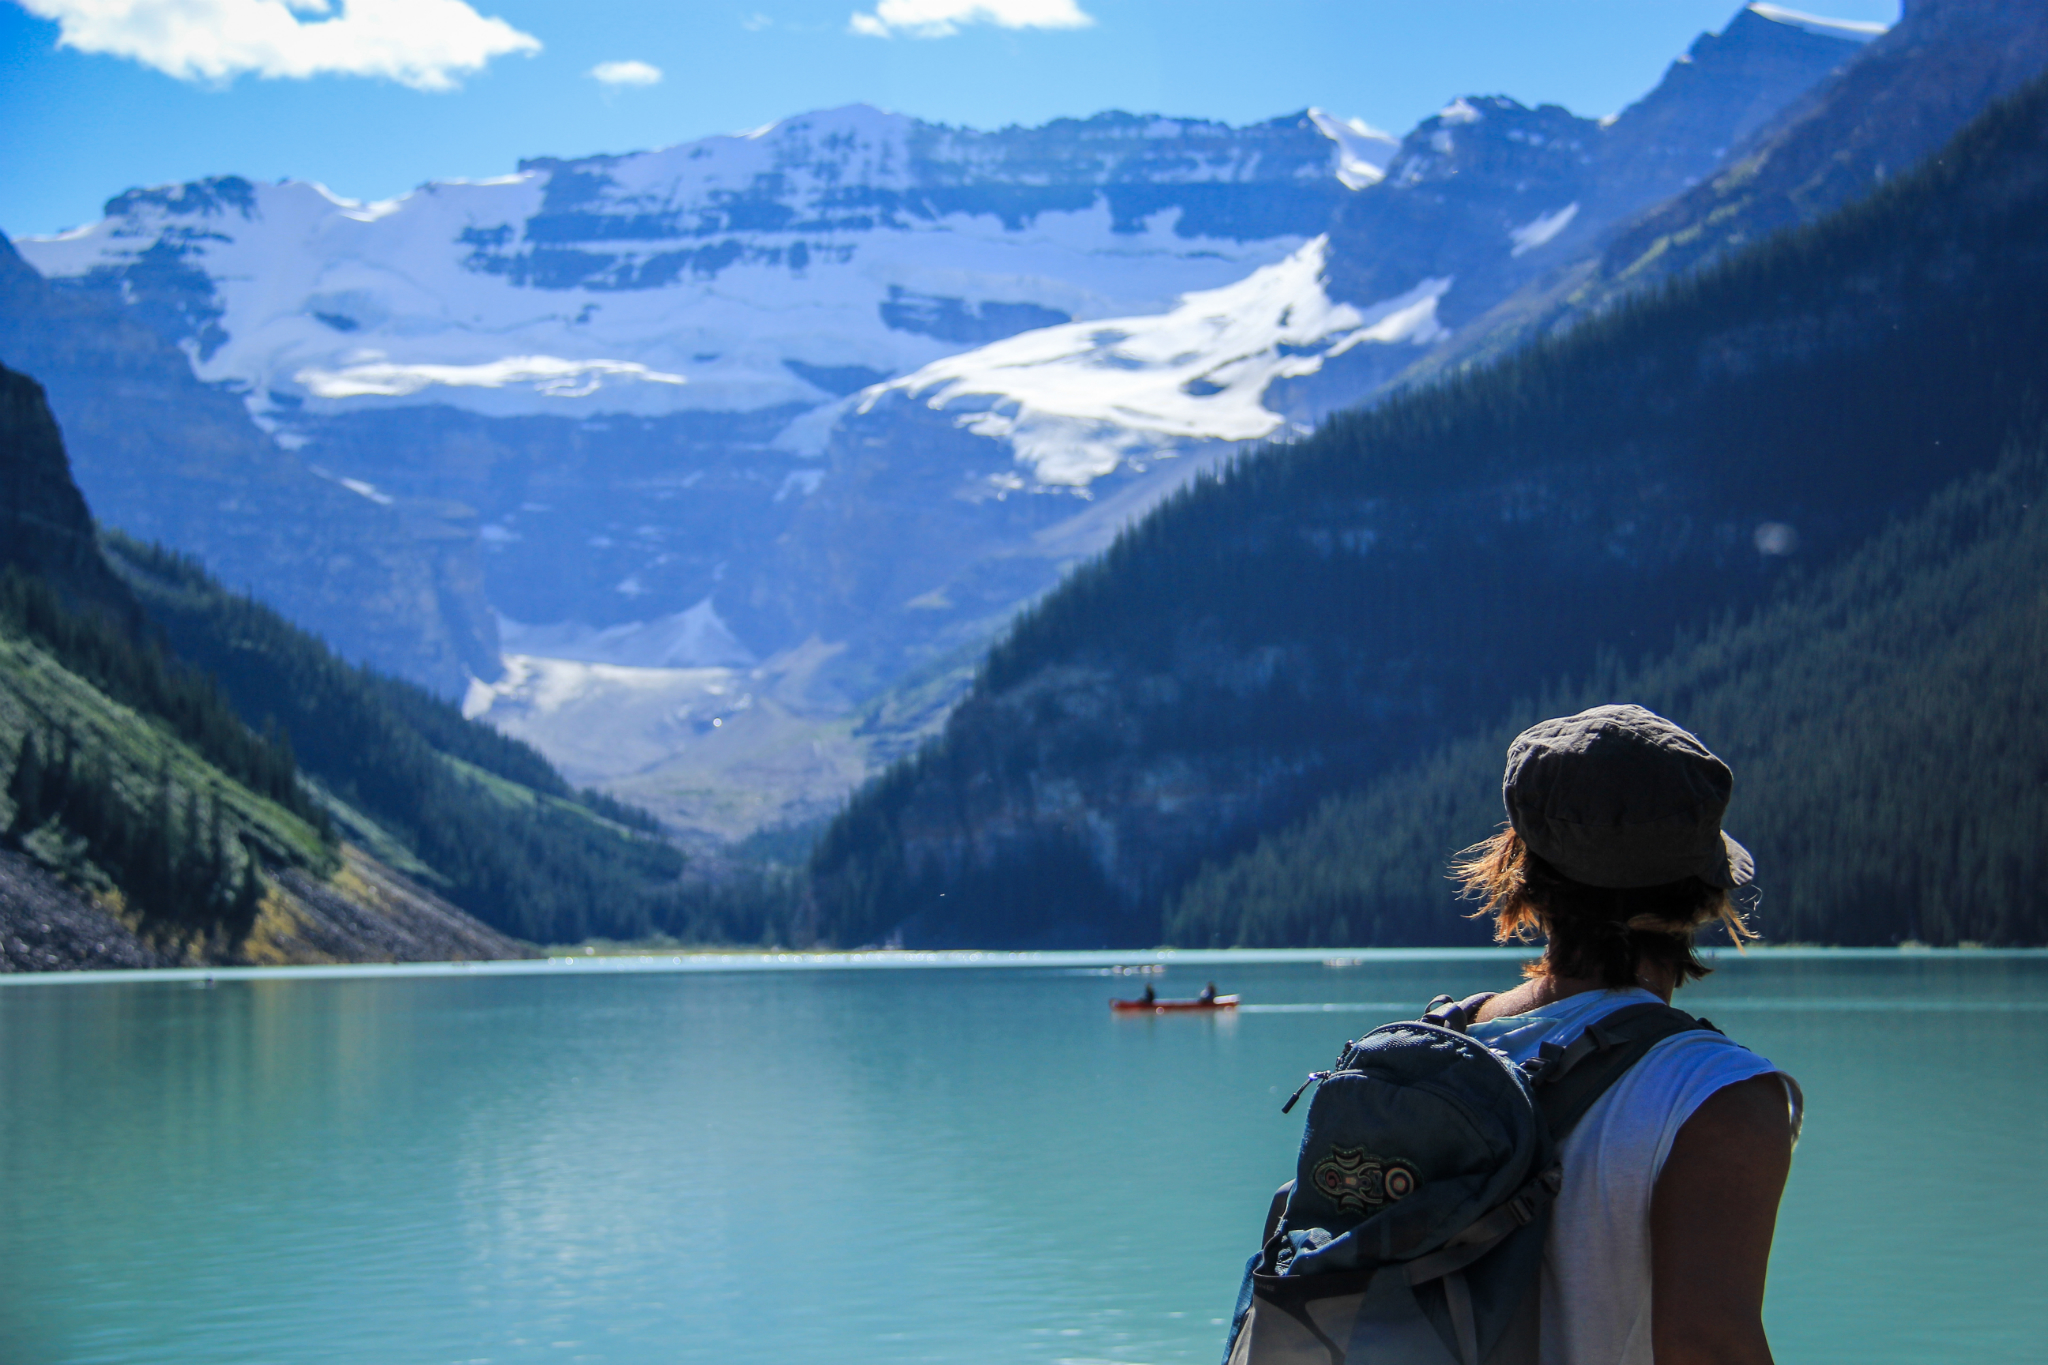 Think you have what it takes to earn the title of Canada’s Greatest Explorer?